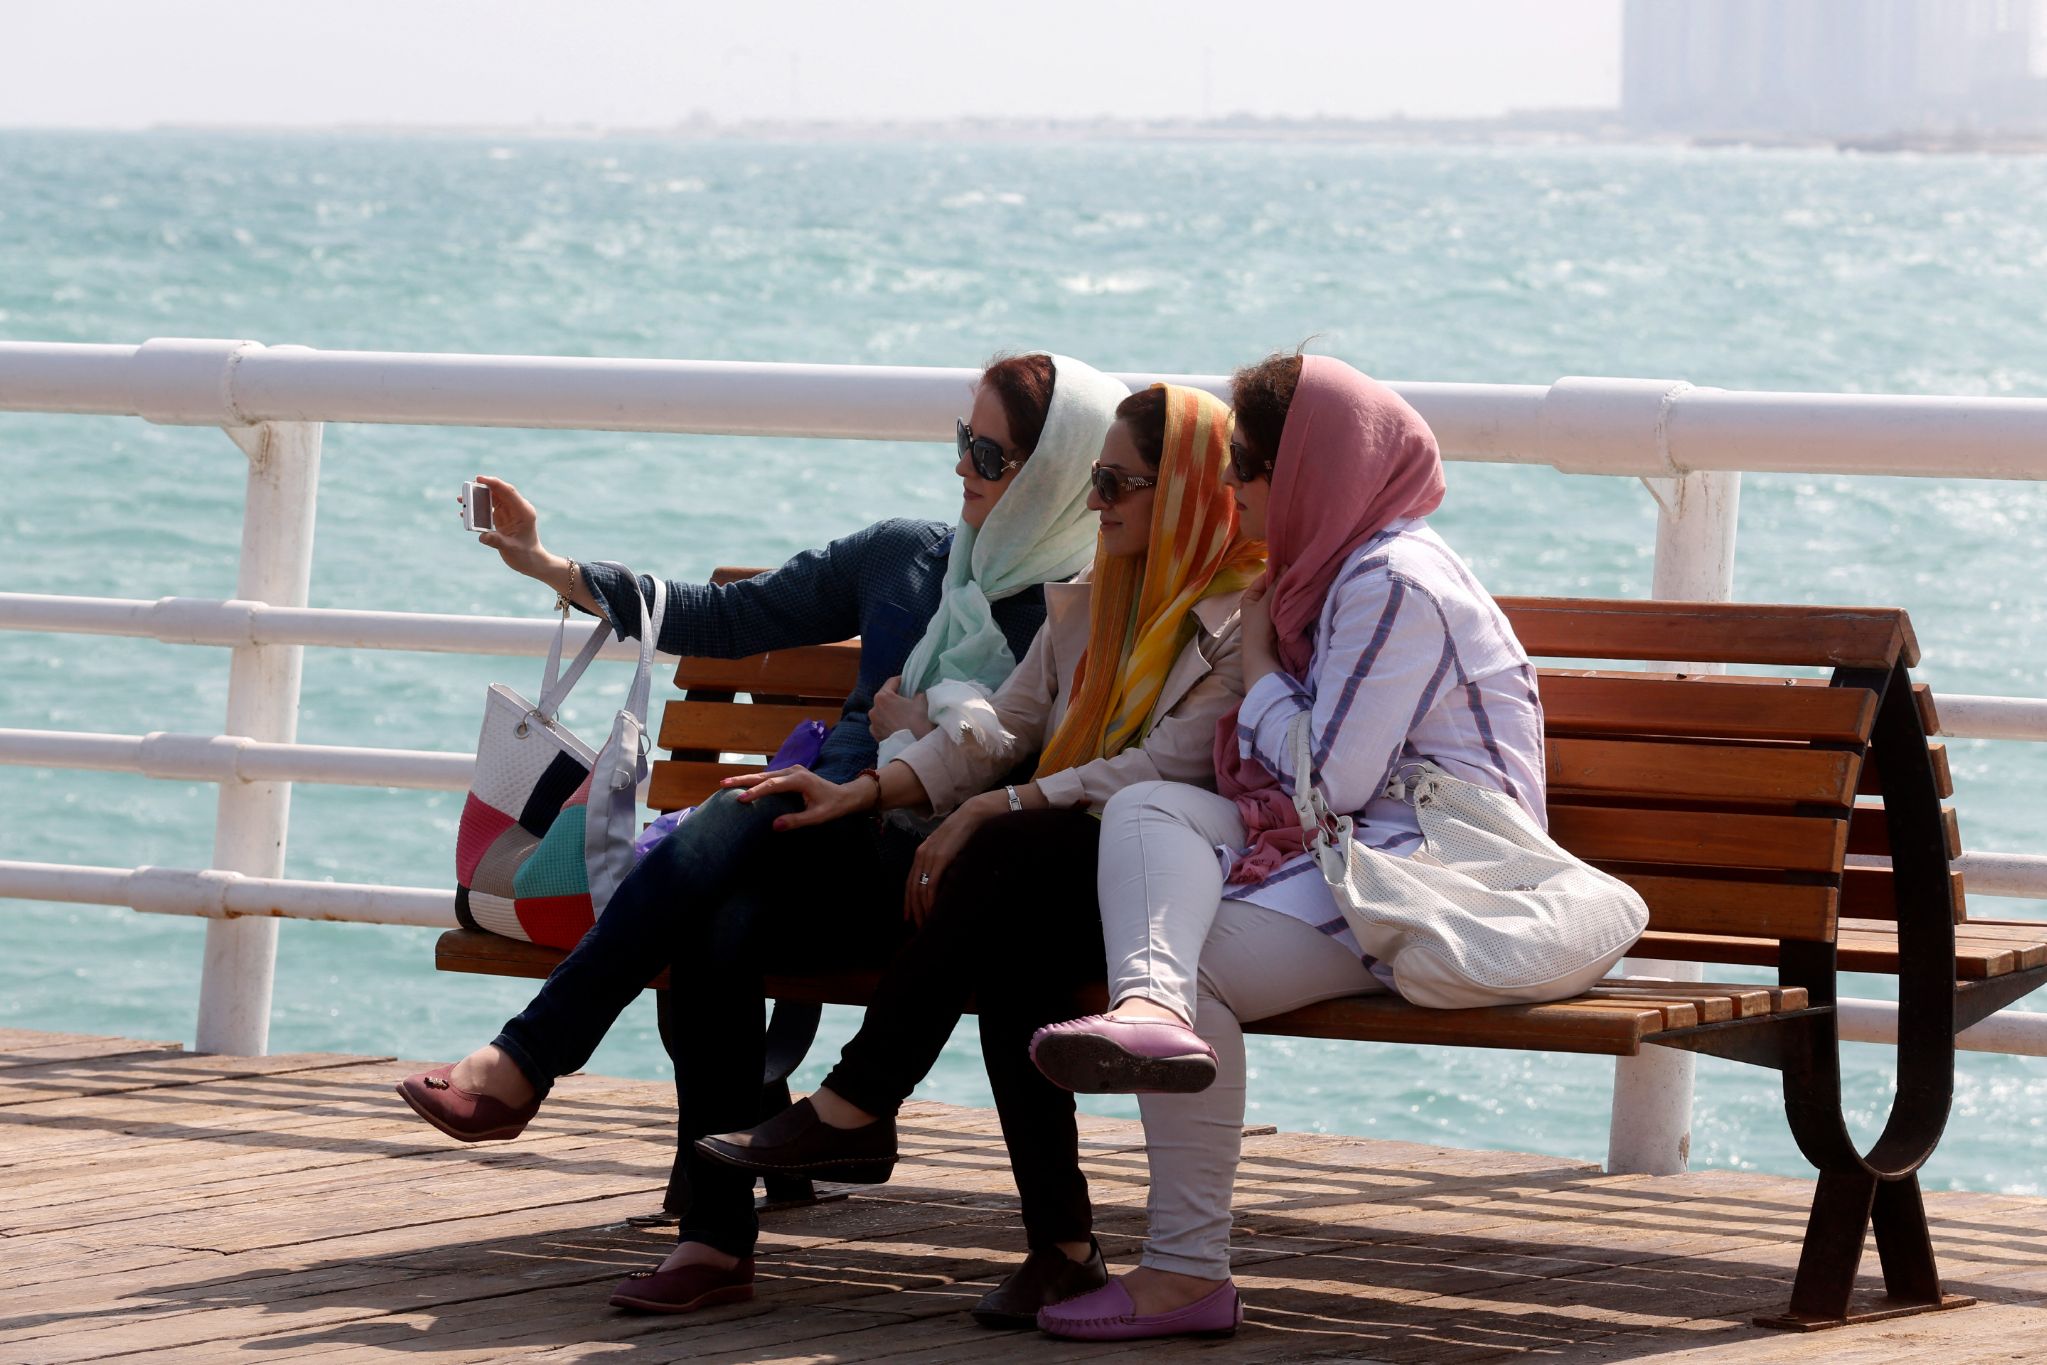 ranian women take a selfie on the sea front in Iran's southern resort island of Kish in November 2016 (Atta Kenare/AFP)